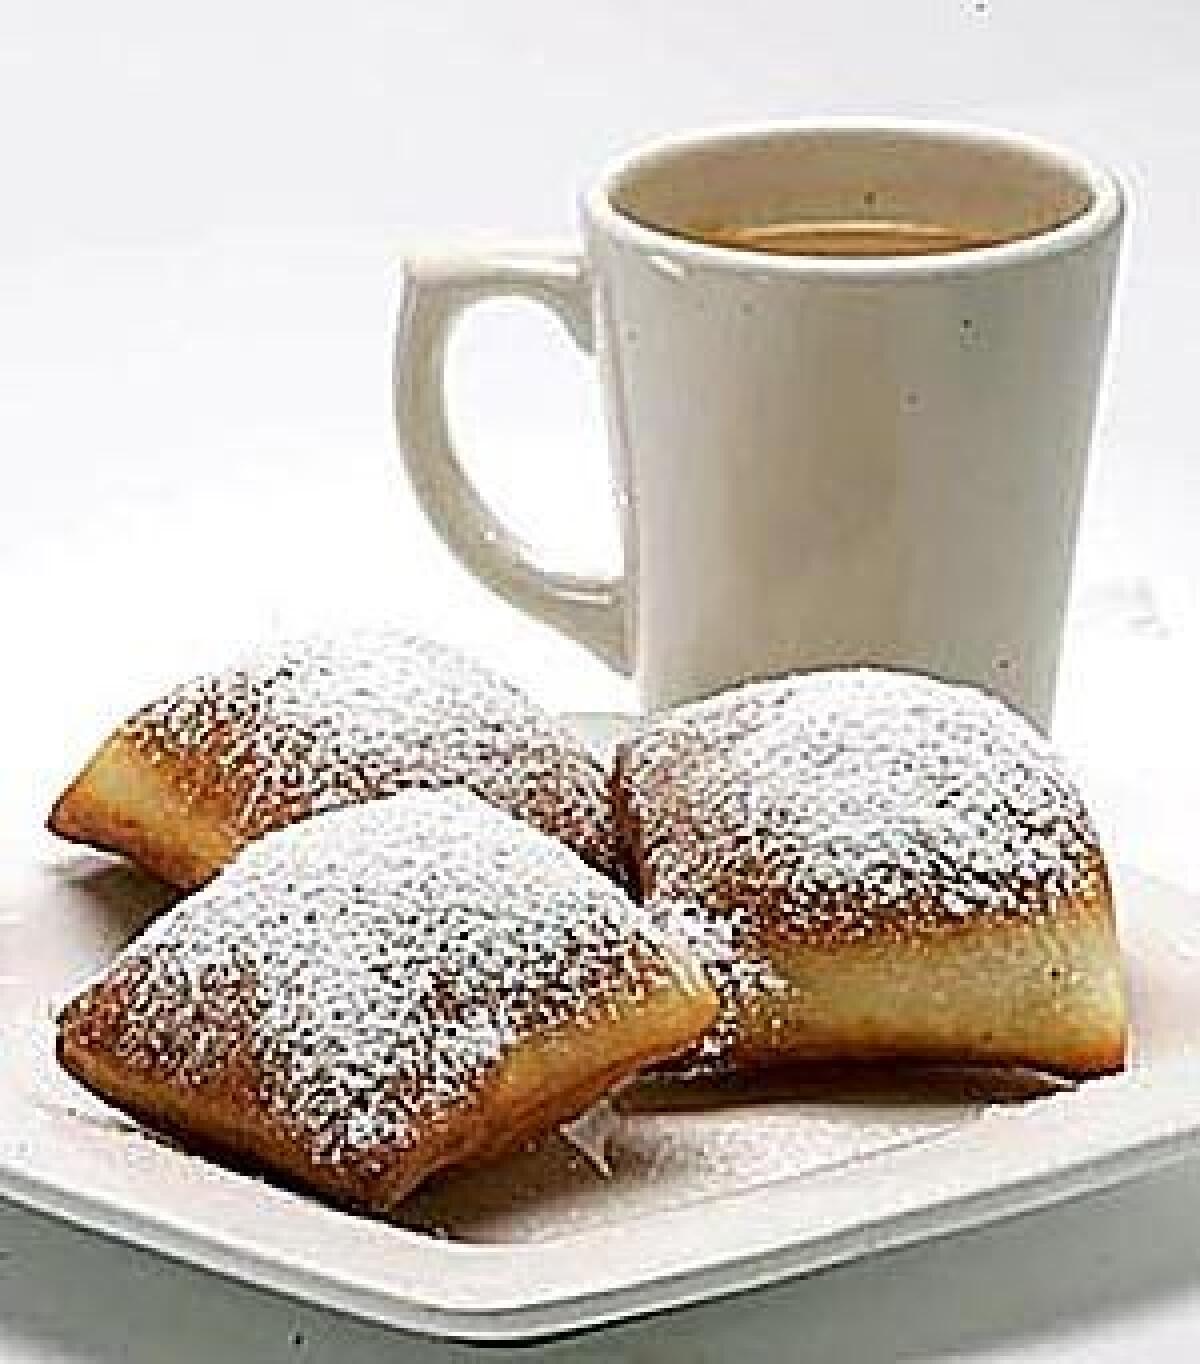 LOUISIANA CLASSIC: New Orleans-style beignets and coffee.